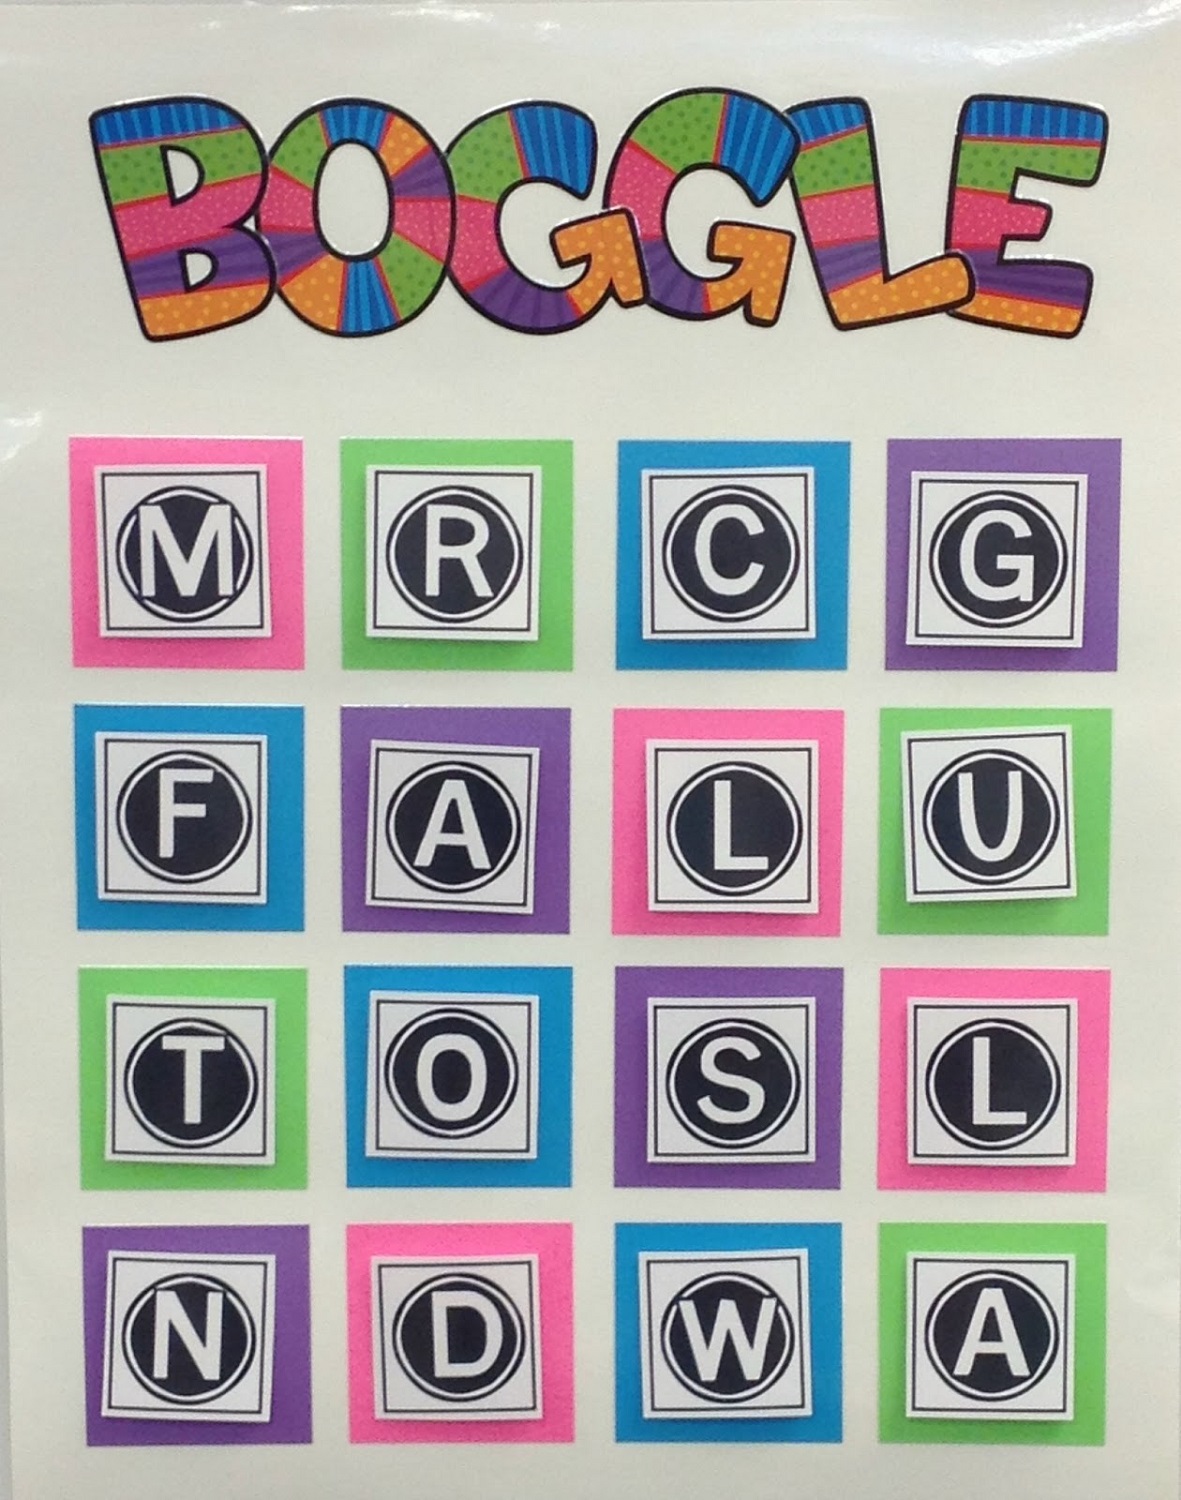 boggle word game for kids